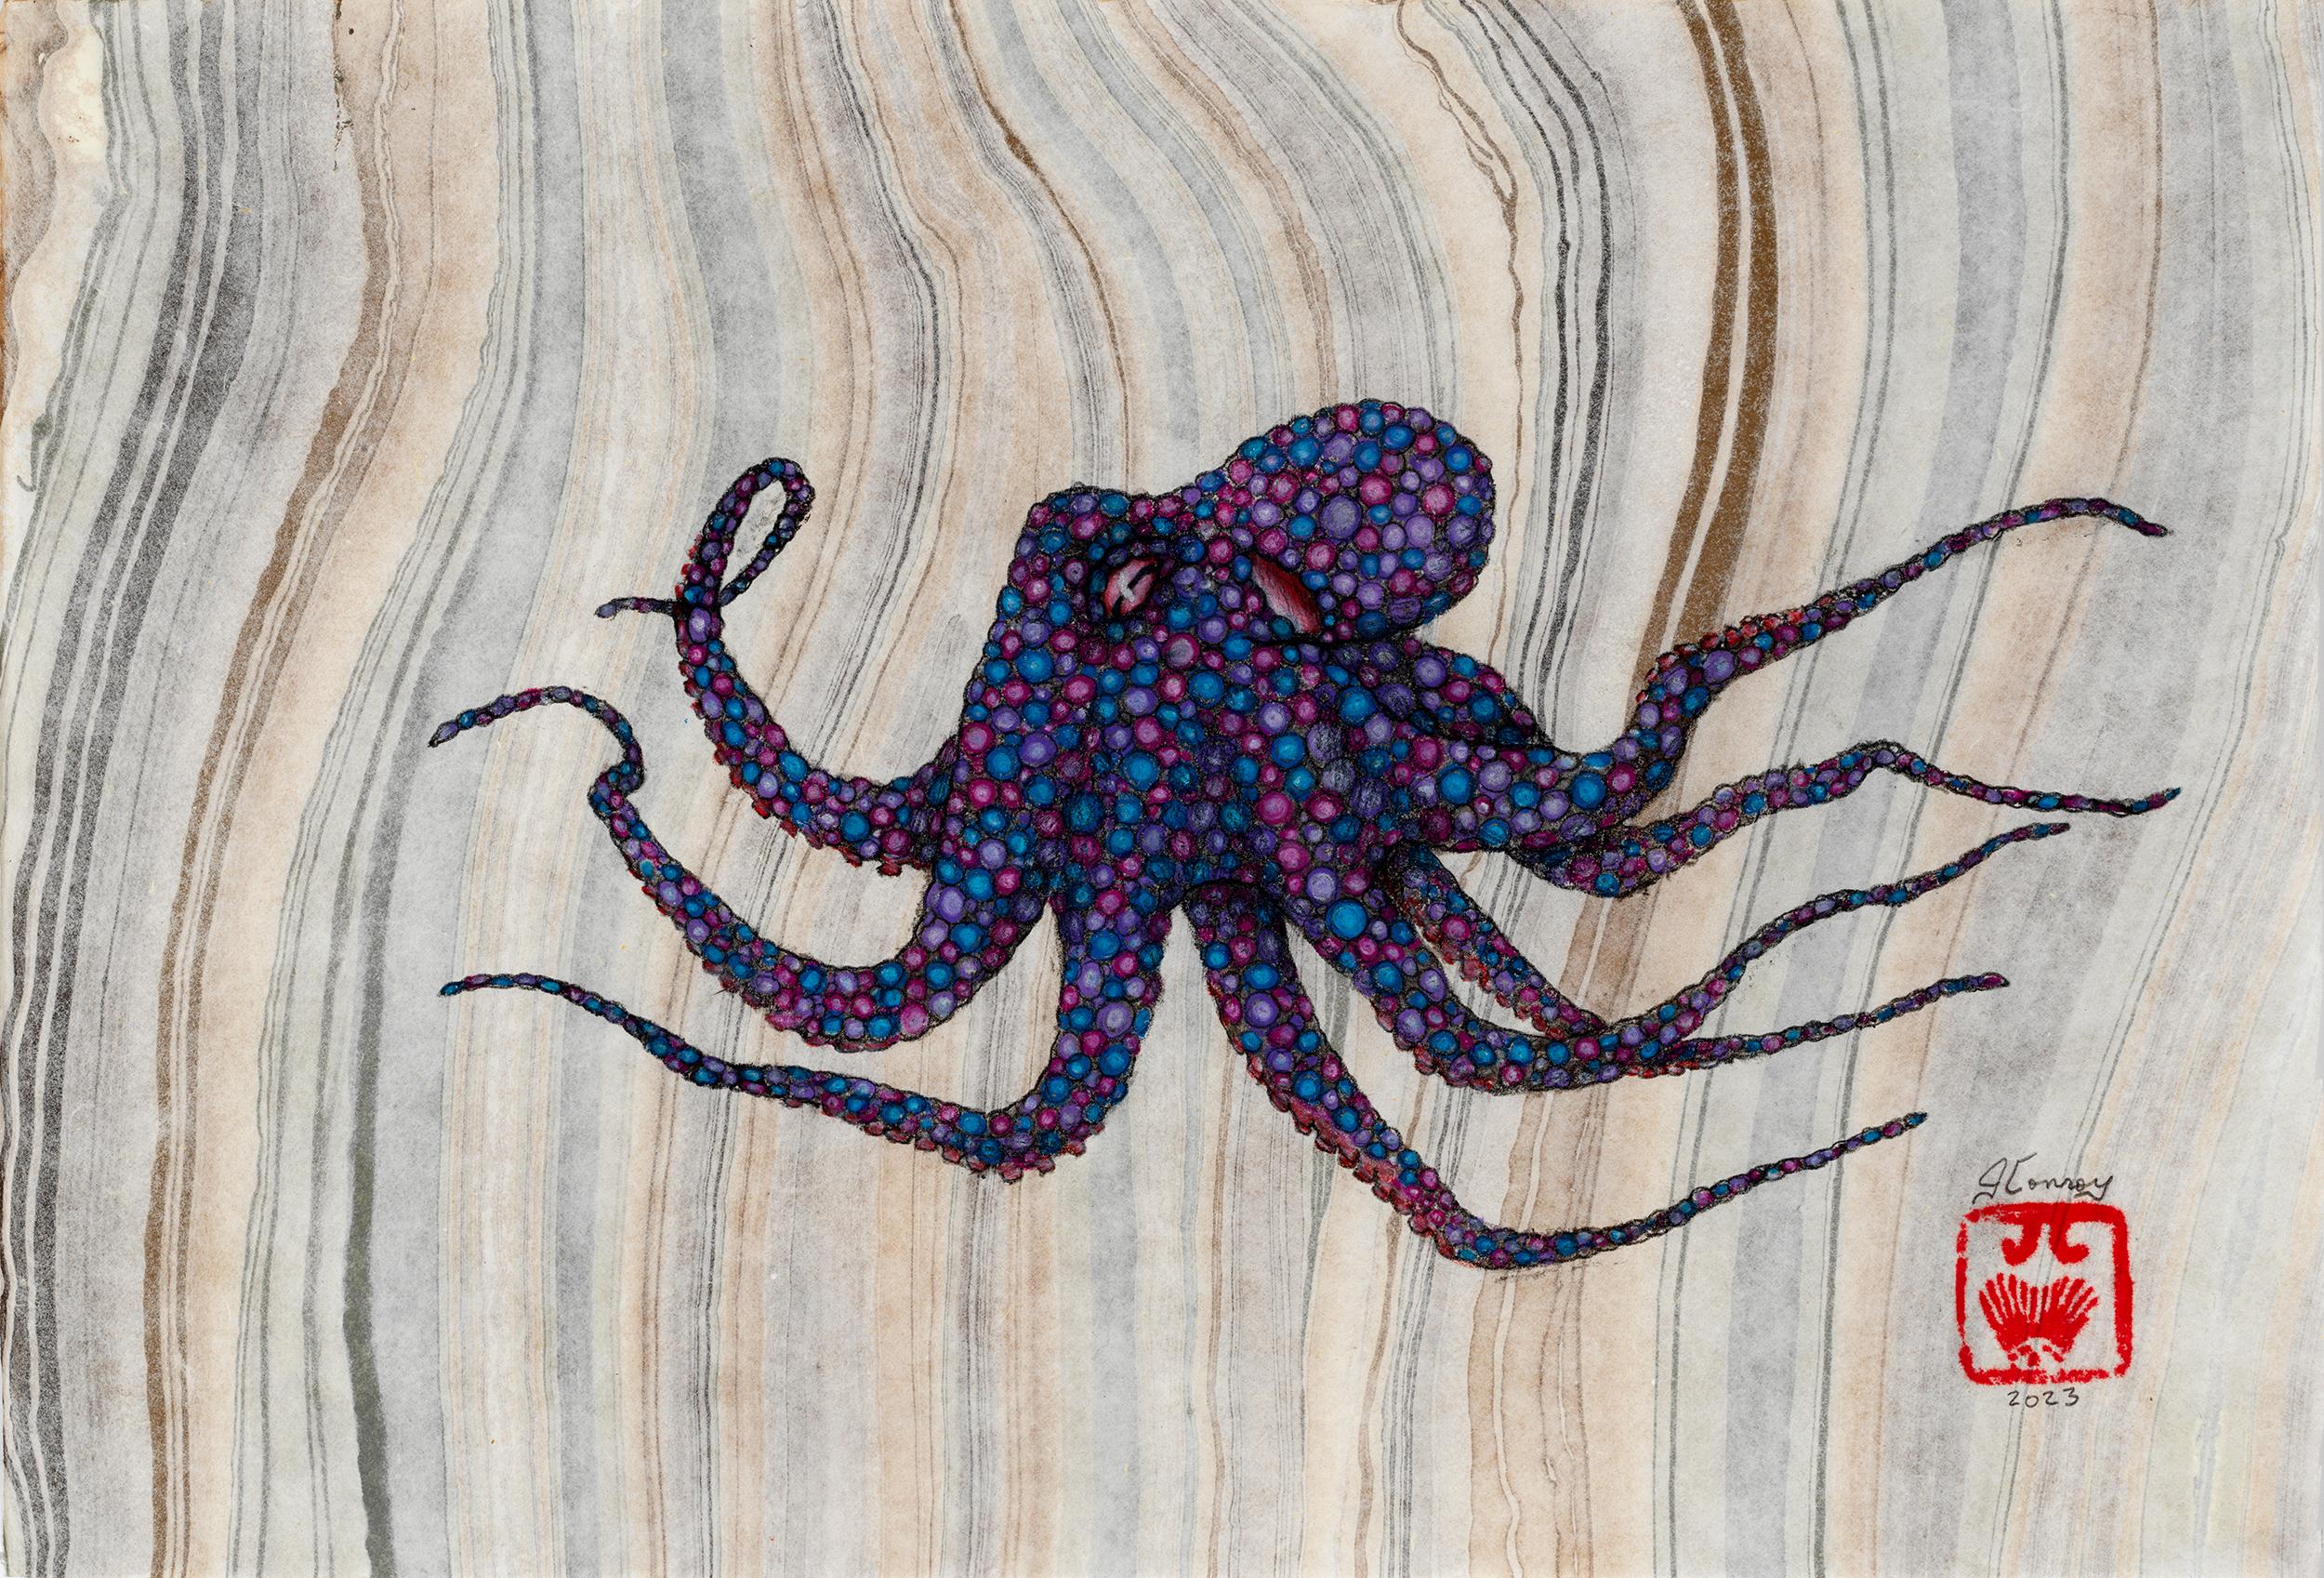 Jeff Conroy Animal Painting - Berry Cobbler - Gyotaku Style Sumi Ink Painting of an Octopus 